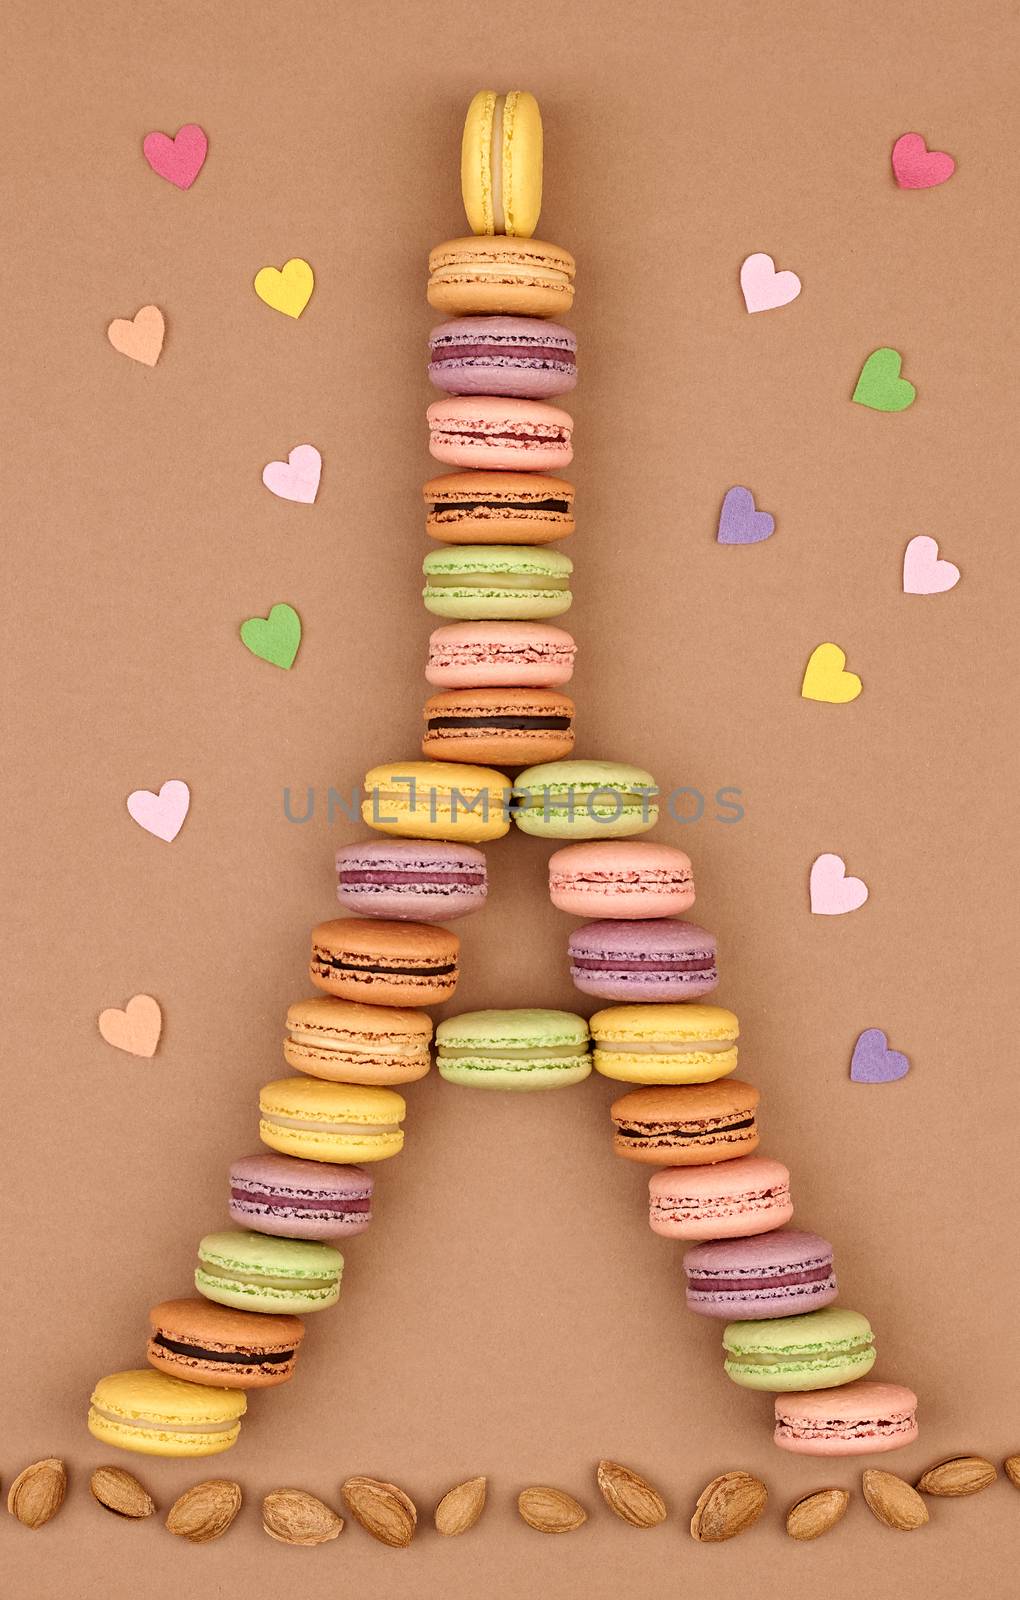 Macarons. Still life. Eiffel Tower french sweet colorful hearts, almond. Fresh pastel dessert on chocolate retro vintage background. Love,Valentines Day,romantic                                       